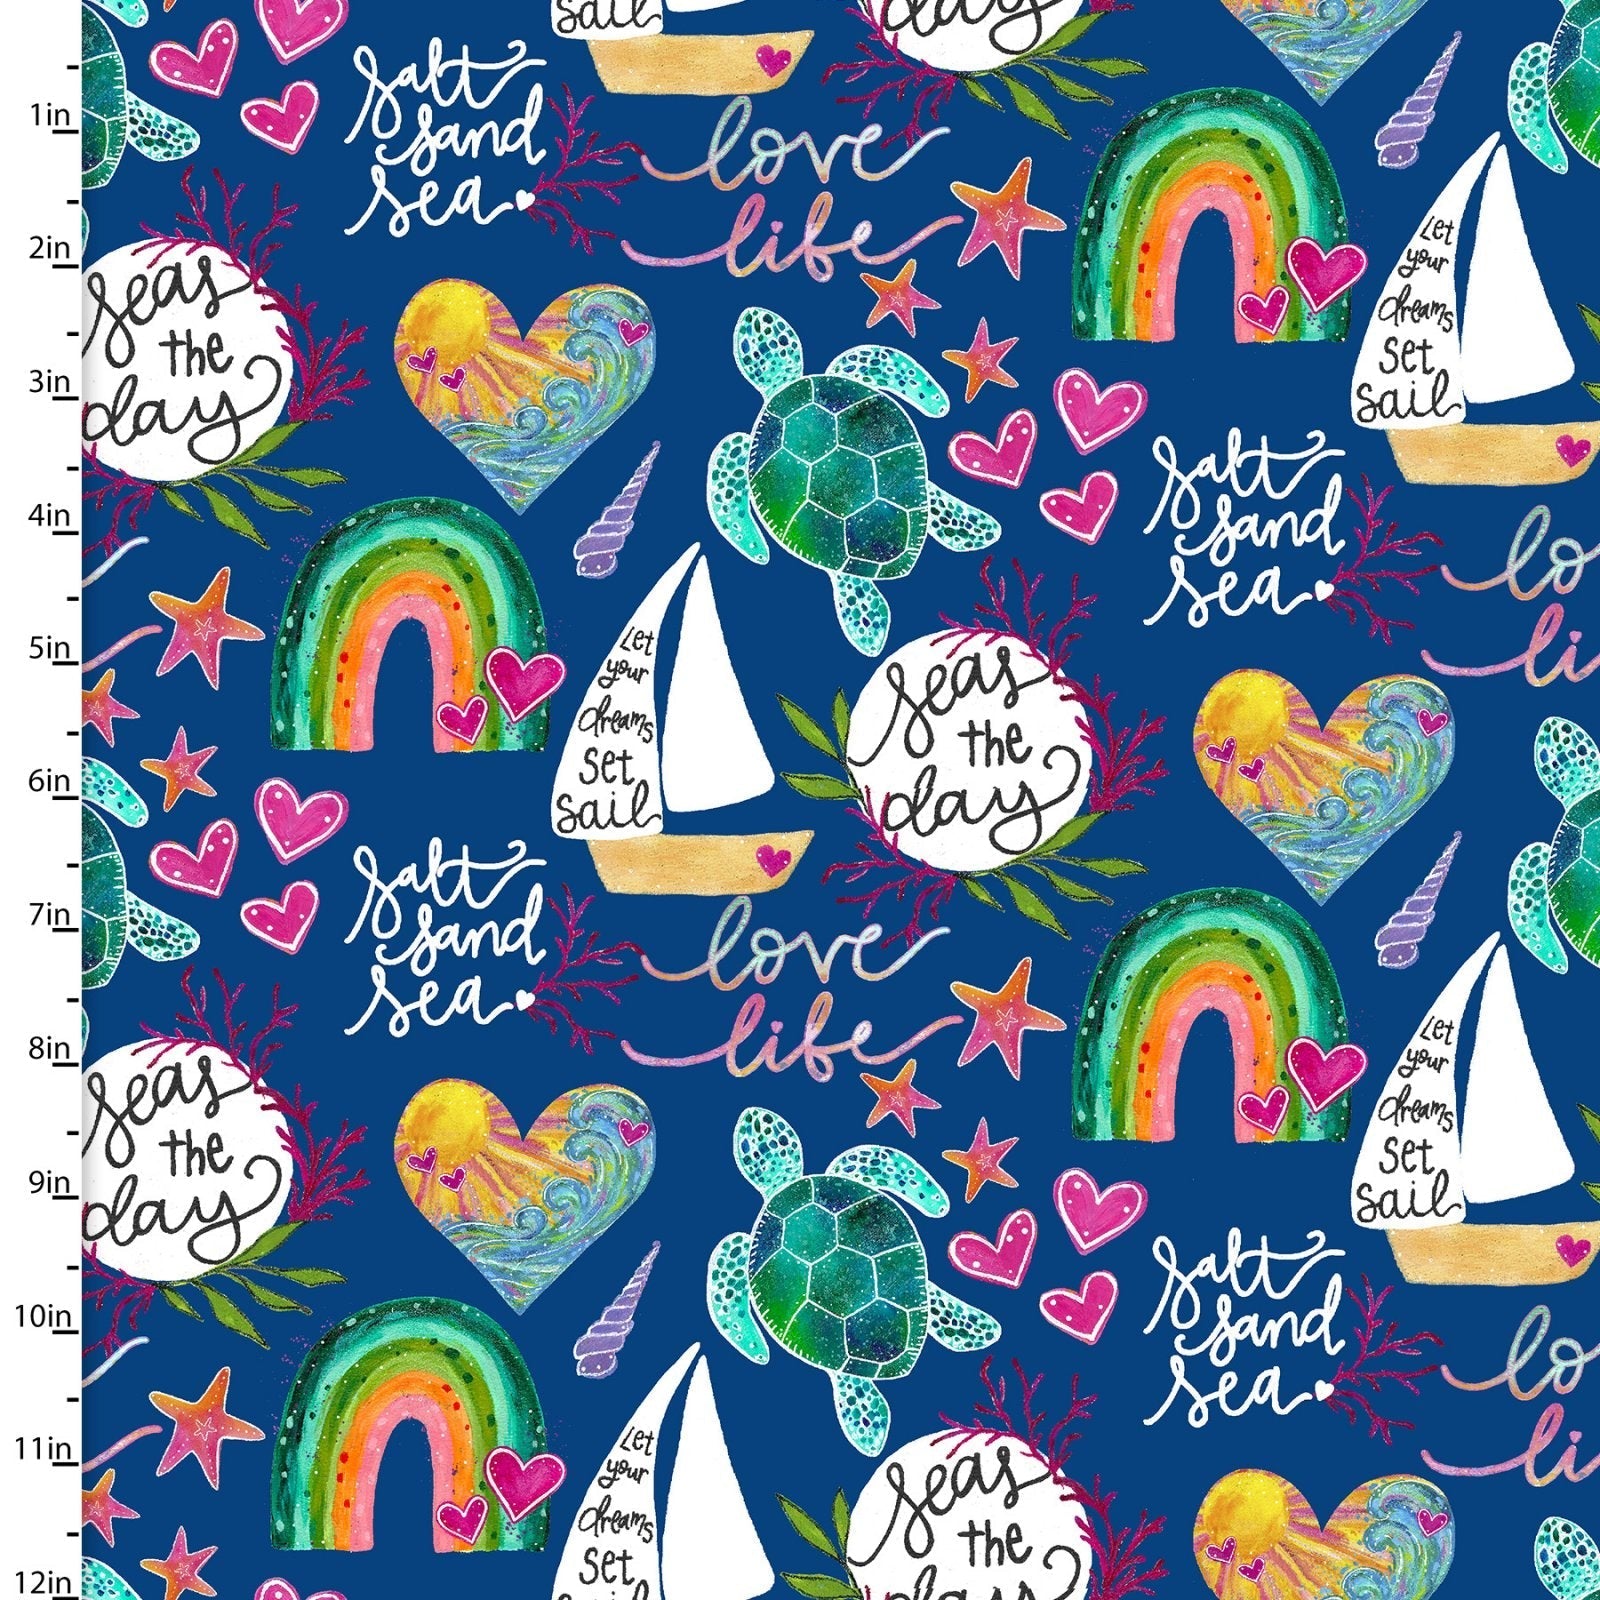 3 Wishes Fabric Seas the Day Words in Navy Fabric by 3 Wishes Cotton Quilting Fabric